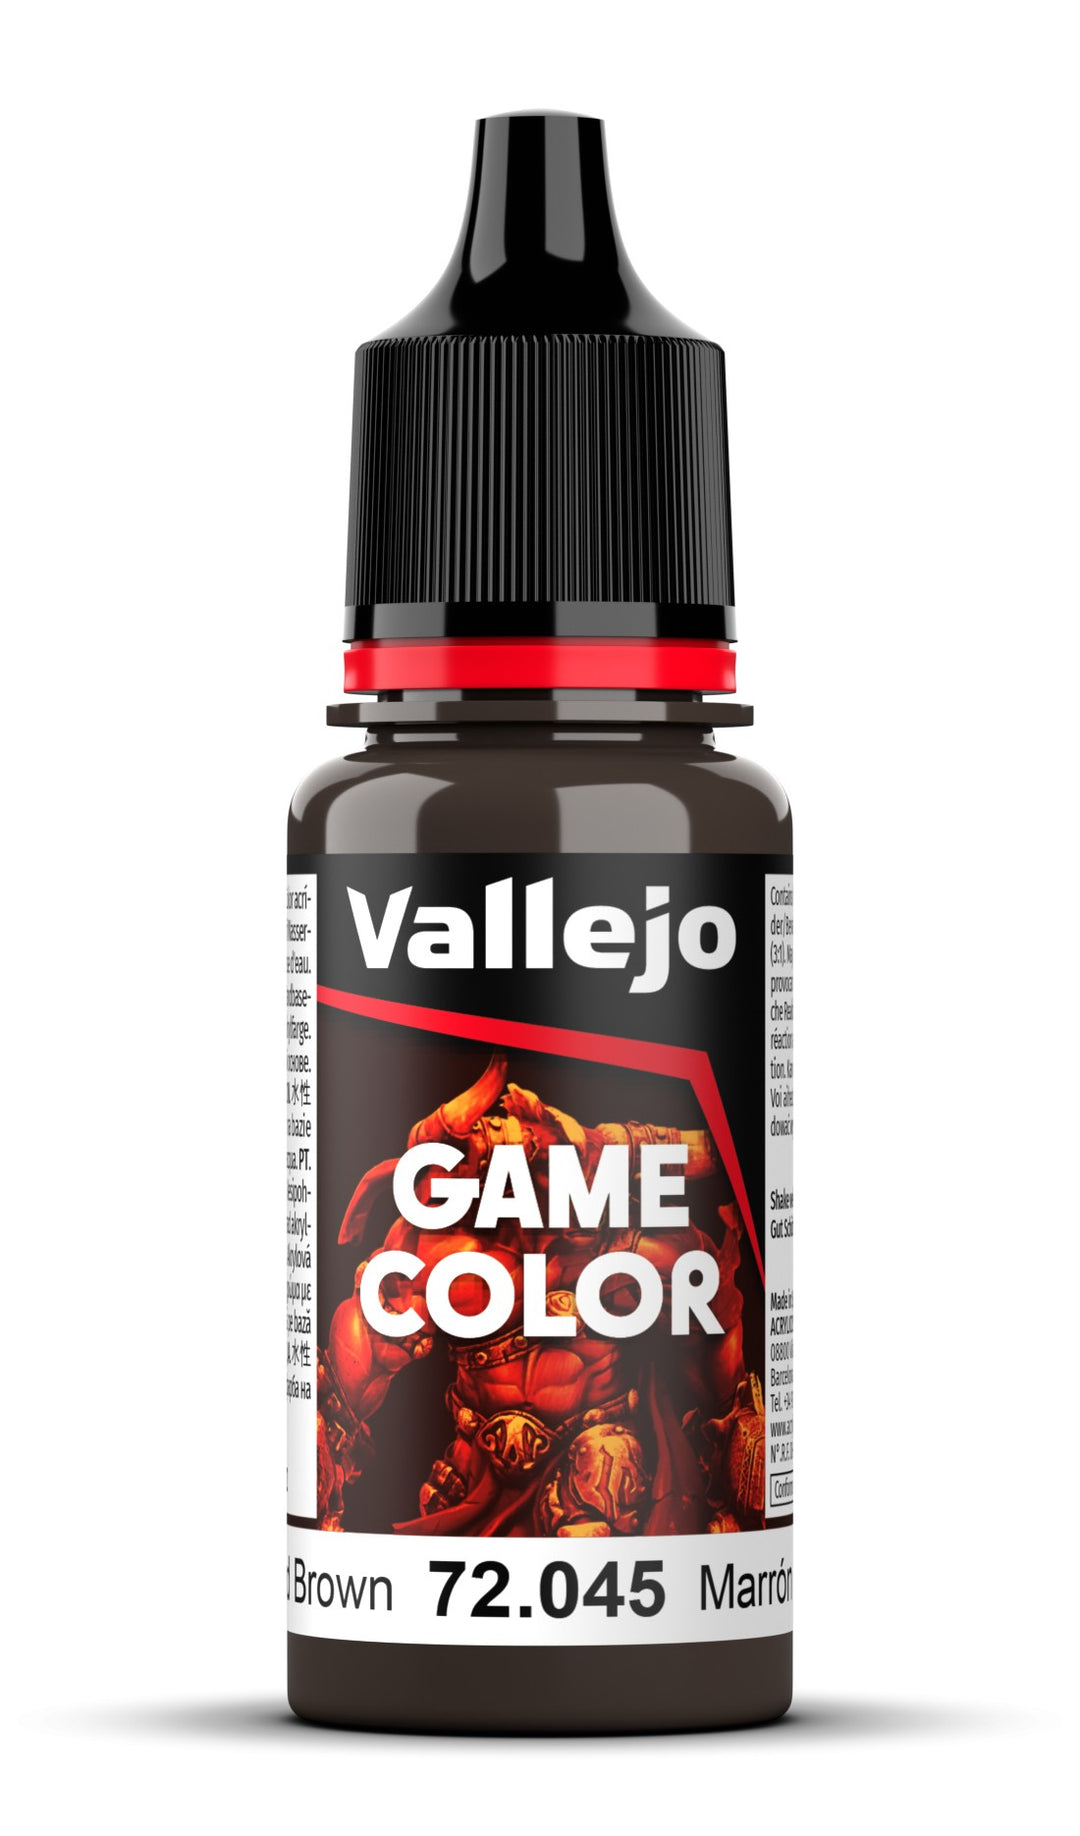 Vallejo Game Color - Charred Brown 18 ml